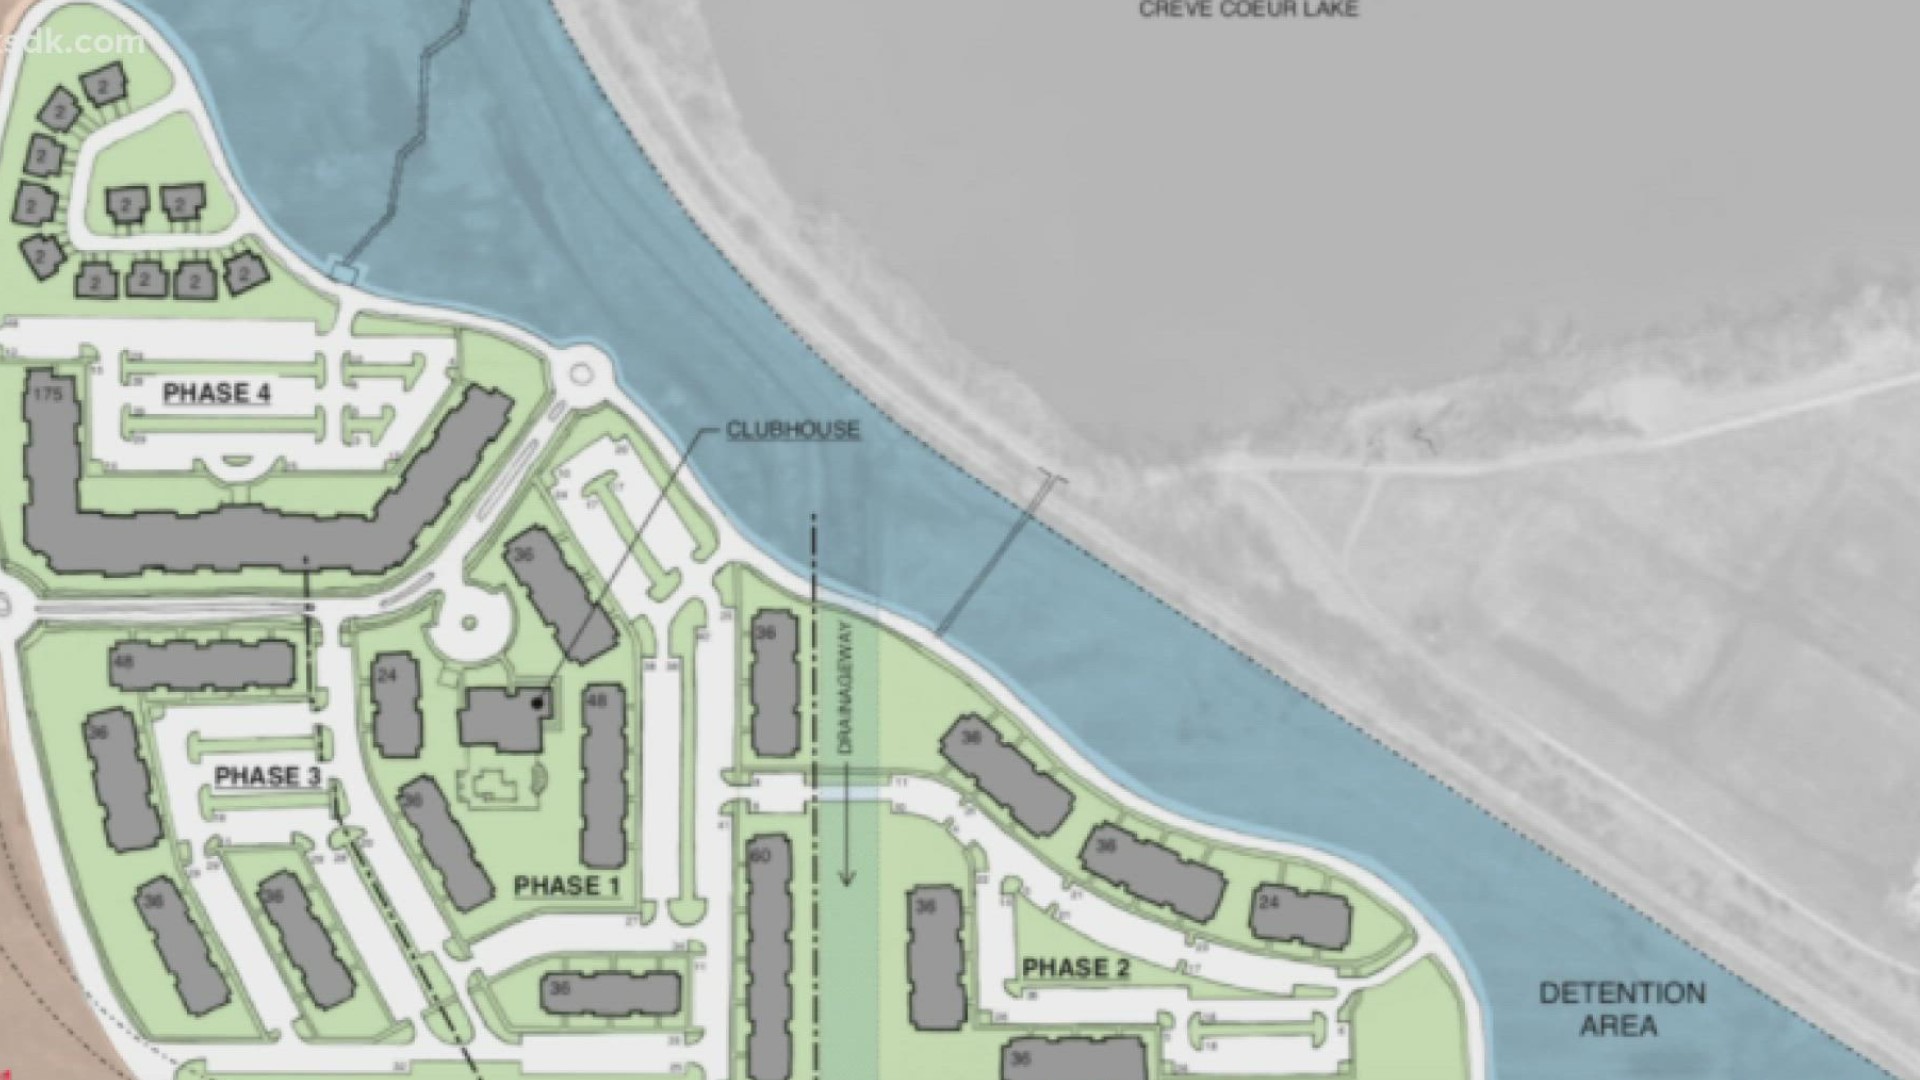 A massive new apartment complex with nearly 800 apartments would be built next to Creve Coeur Lake in a plan under consideration by the city of Maryland Heights.